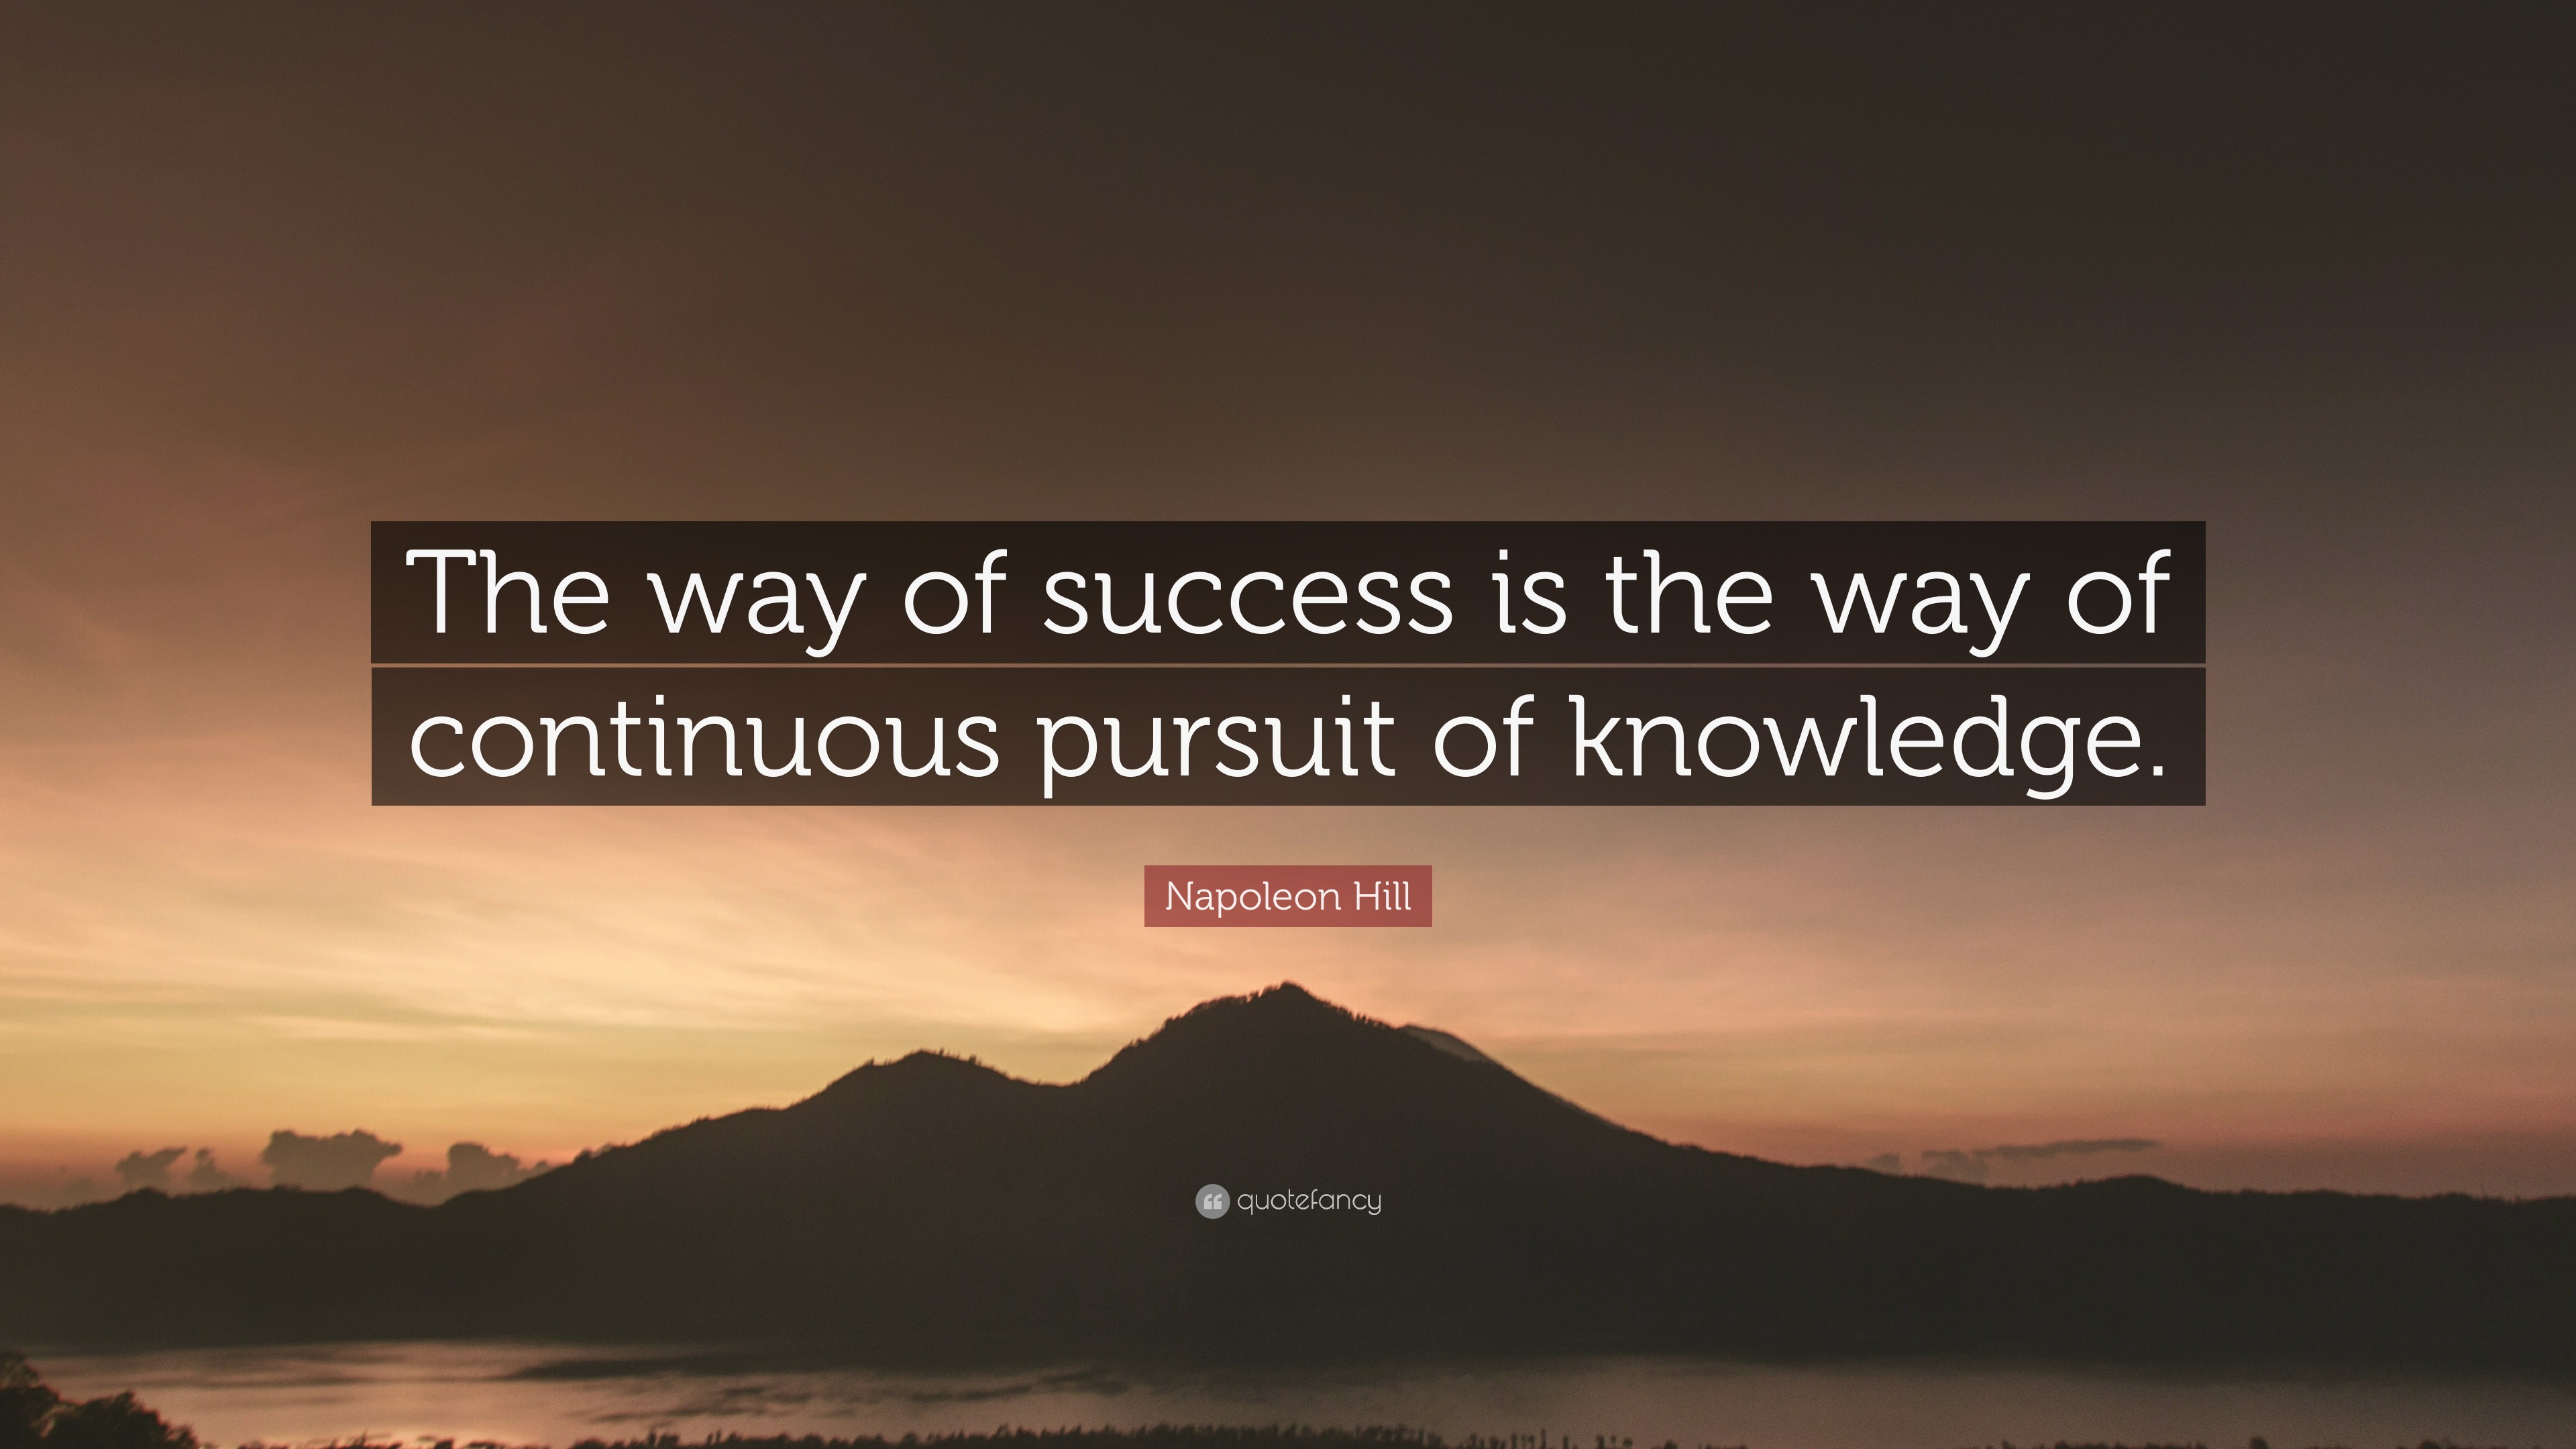 Napoleon Hill Quote “The way of success is the way of